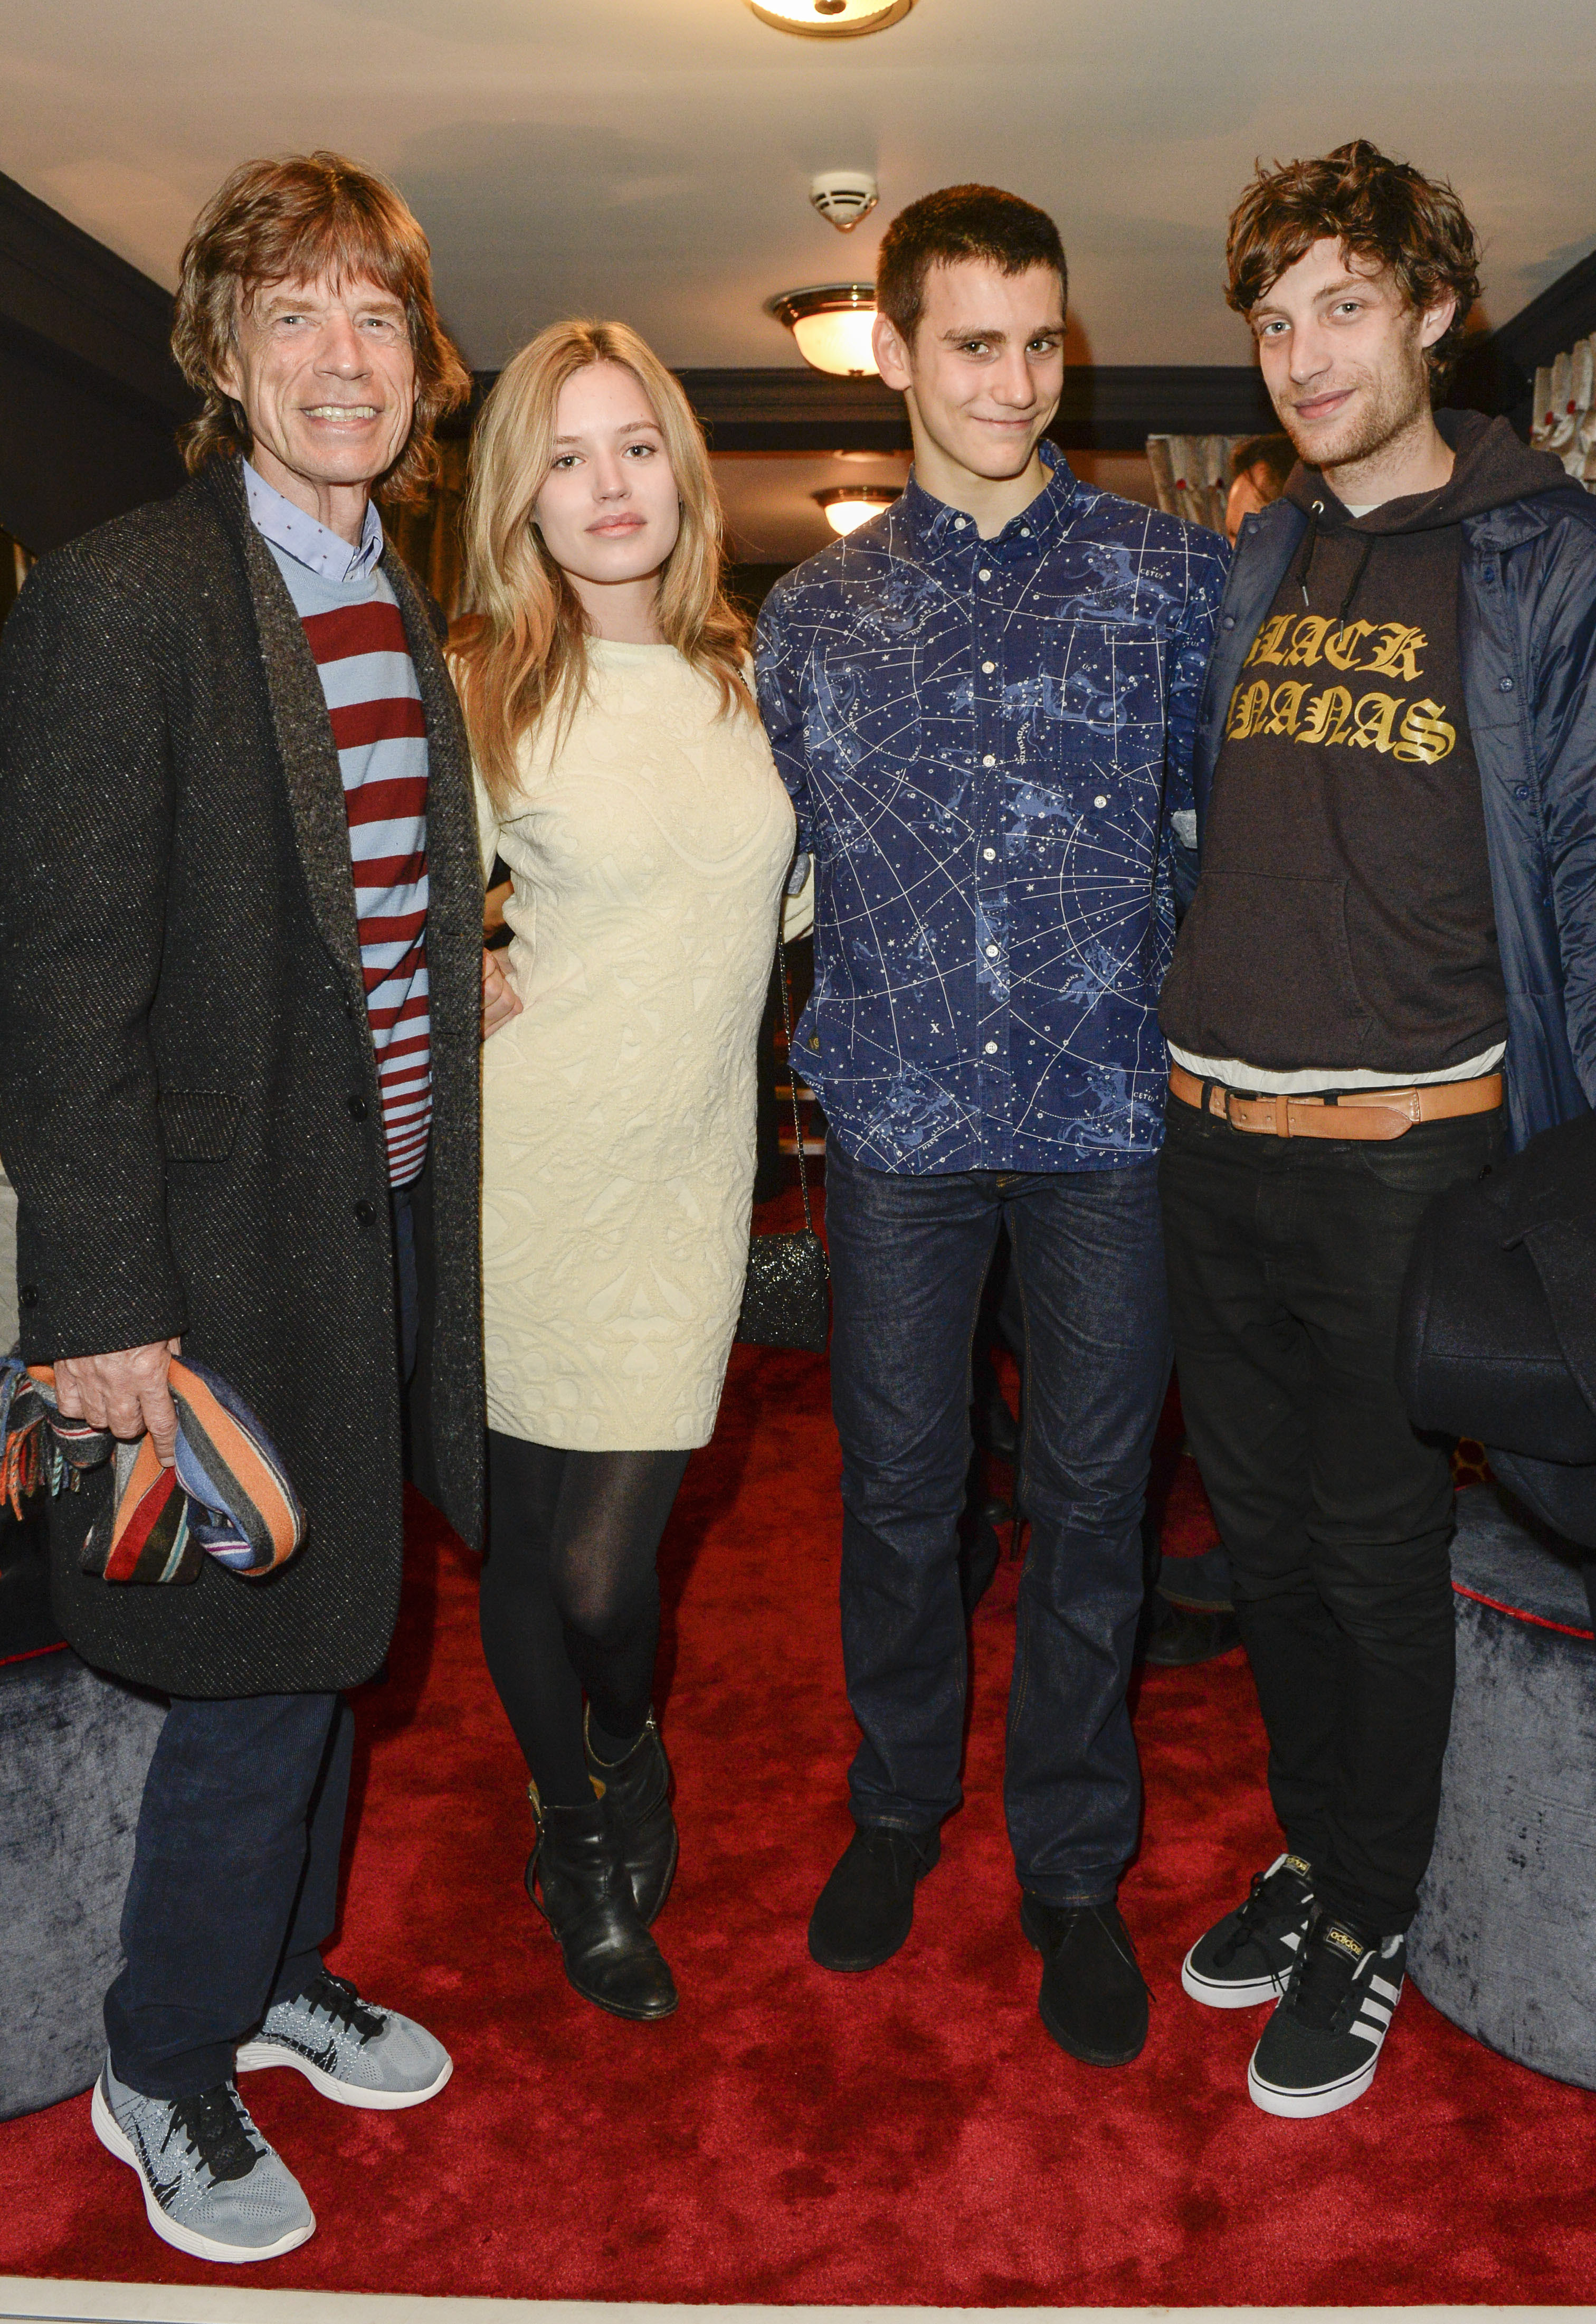 Sir Mick Jagger, Georgia May Jagger, Gabriel Jagger and James Jagger attend the press night performance of "Snow White And The Seven Dwarfs" at the Richmond Theatre on December 11, 2014 in Richmond, England | Source: Getty Images